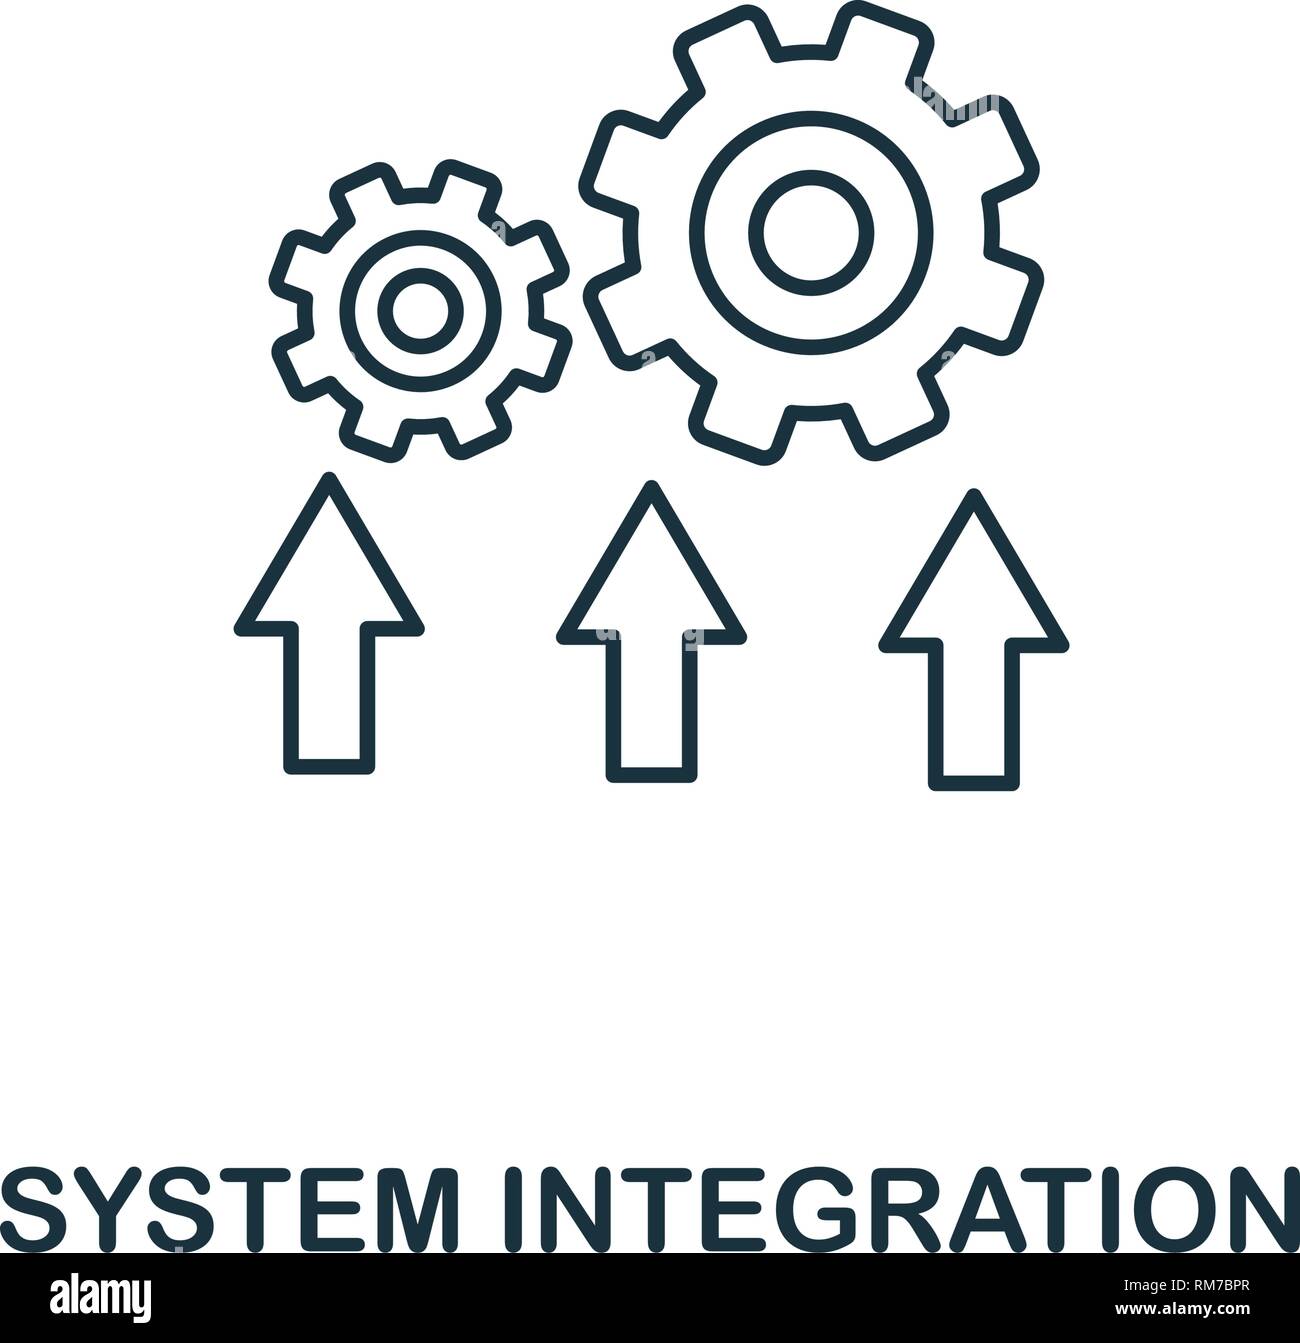 System Integration outline icon. Thin line style industry 4.0 icons collection. UI and UX. Pixel perfect system integration icon for web design, apps, Stock Vector